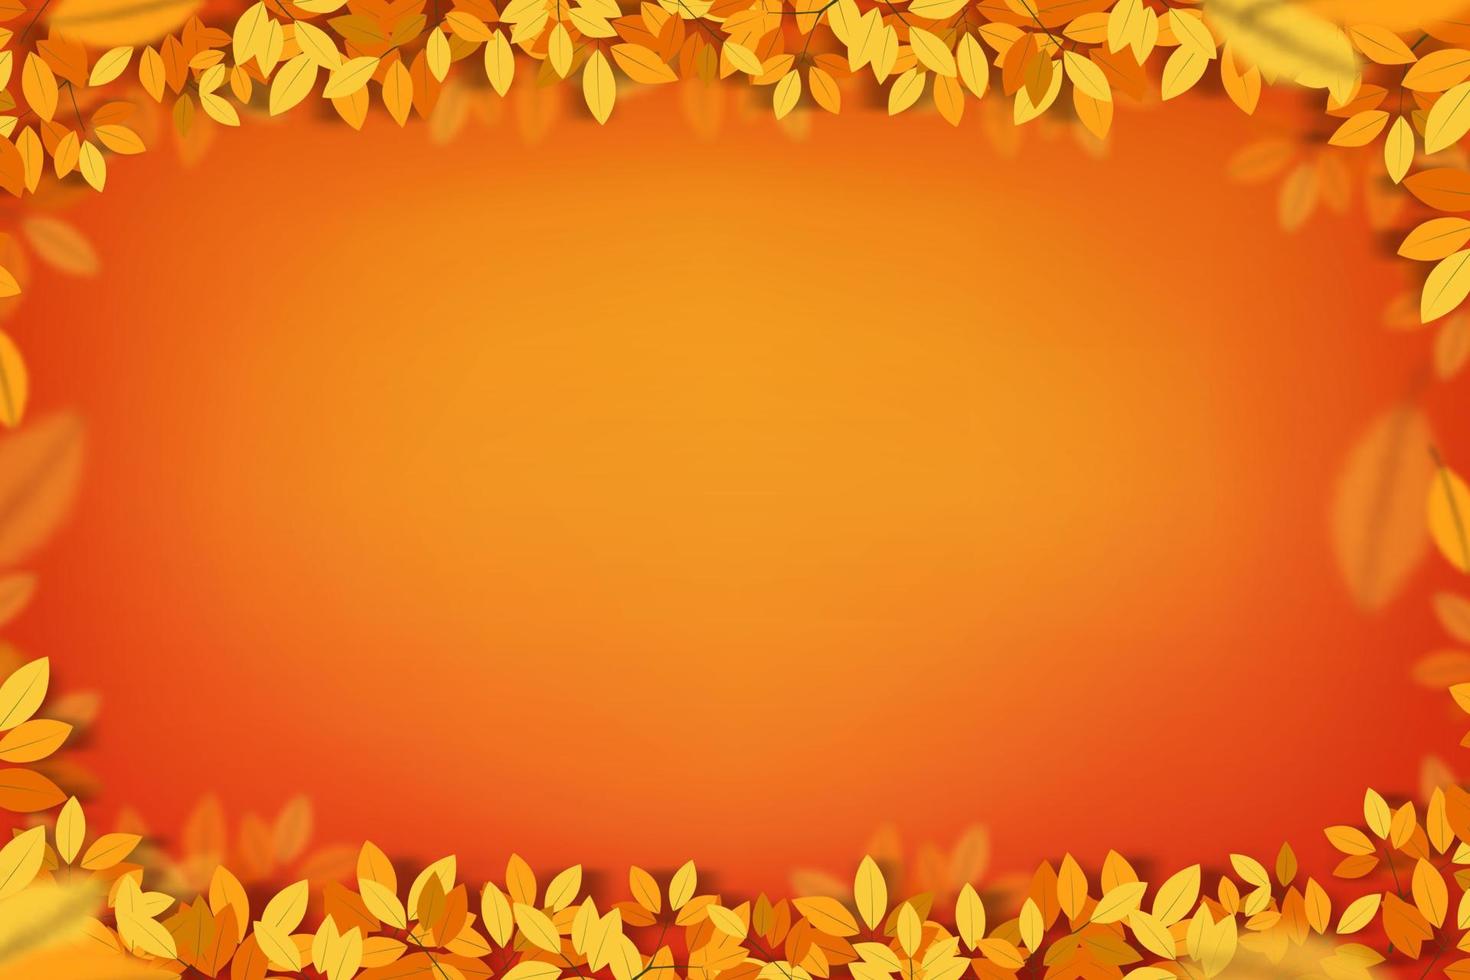 Autumn background,leaves frame on Orange,Yellow gradient background,Backdrop design for fall season sale banner,Poster,Thanksgiving Greeting card,Harvest festival invitation,Vector Paper cut art style vector